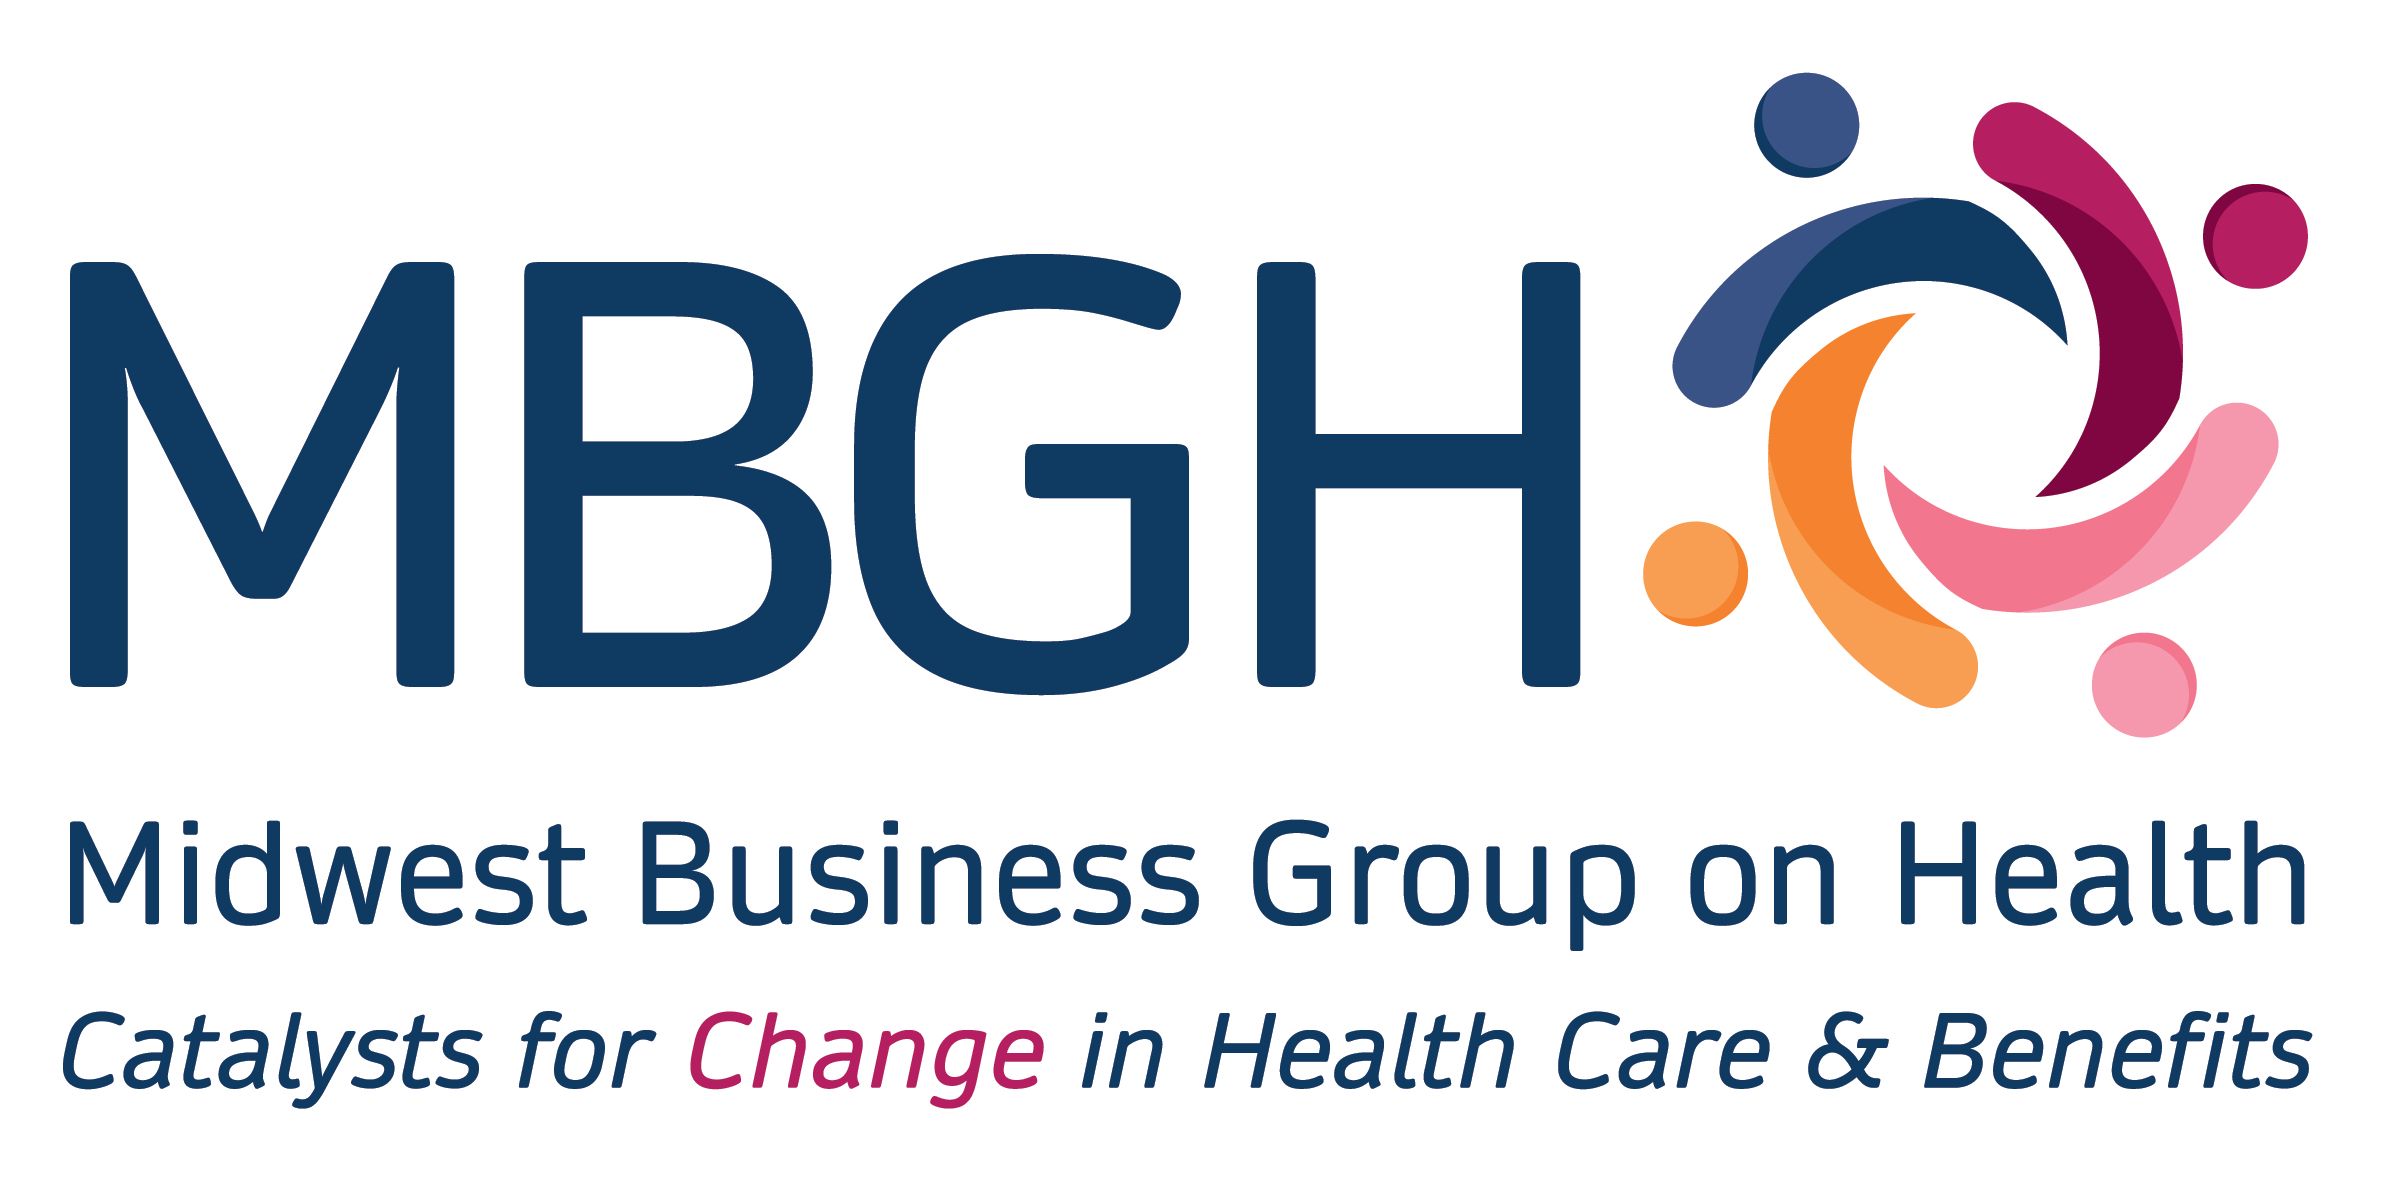 Midwest Business Group on Health